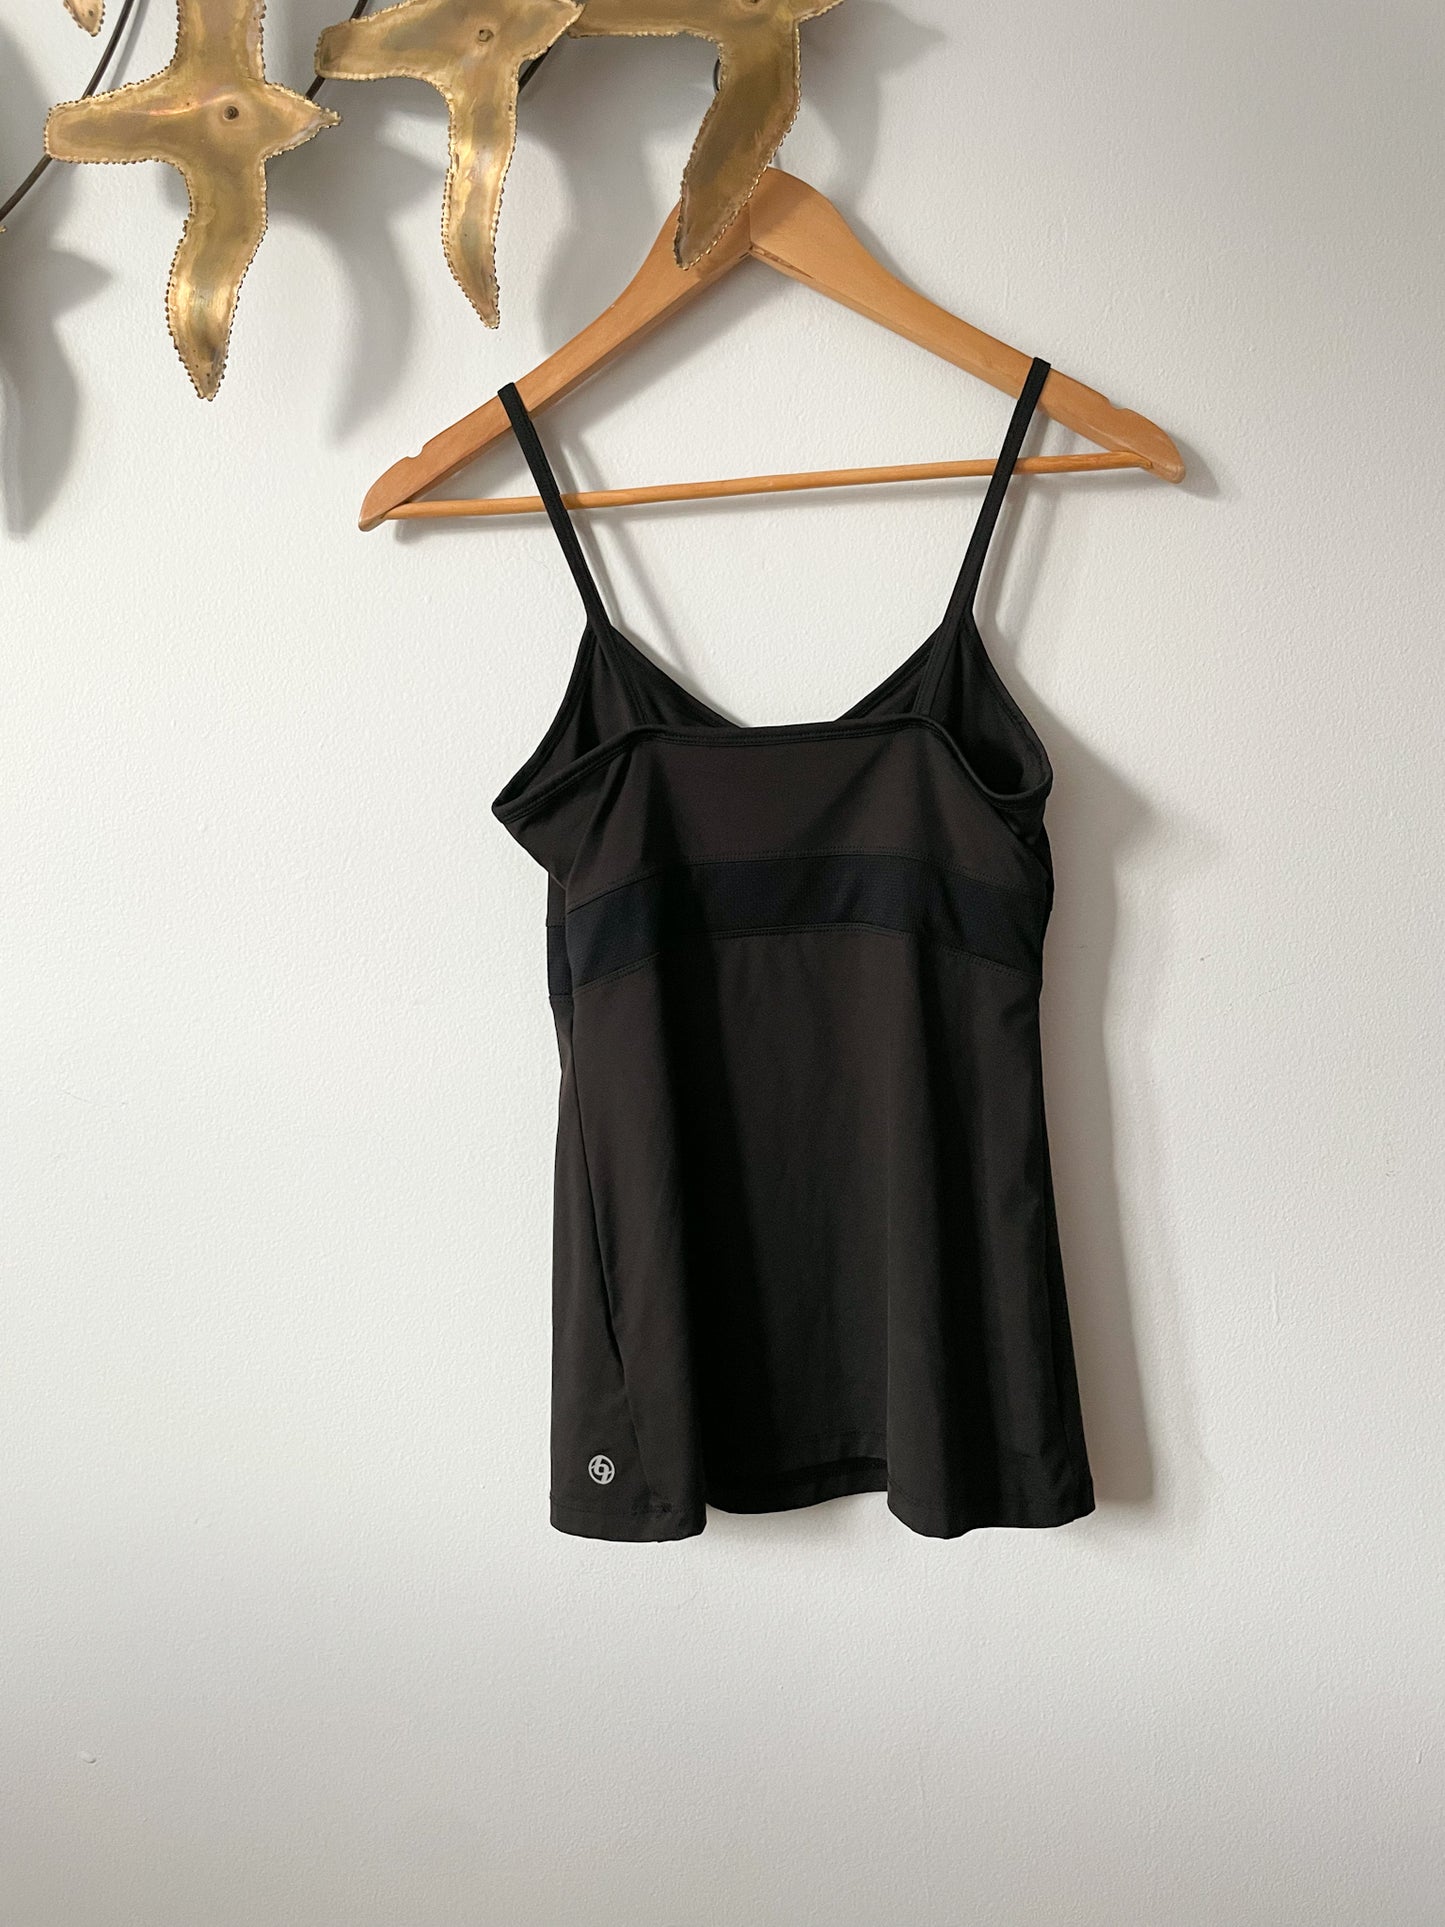 Lija Black Paneled Workout Golf Camisole with Built in Bra - Small